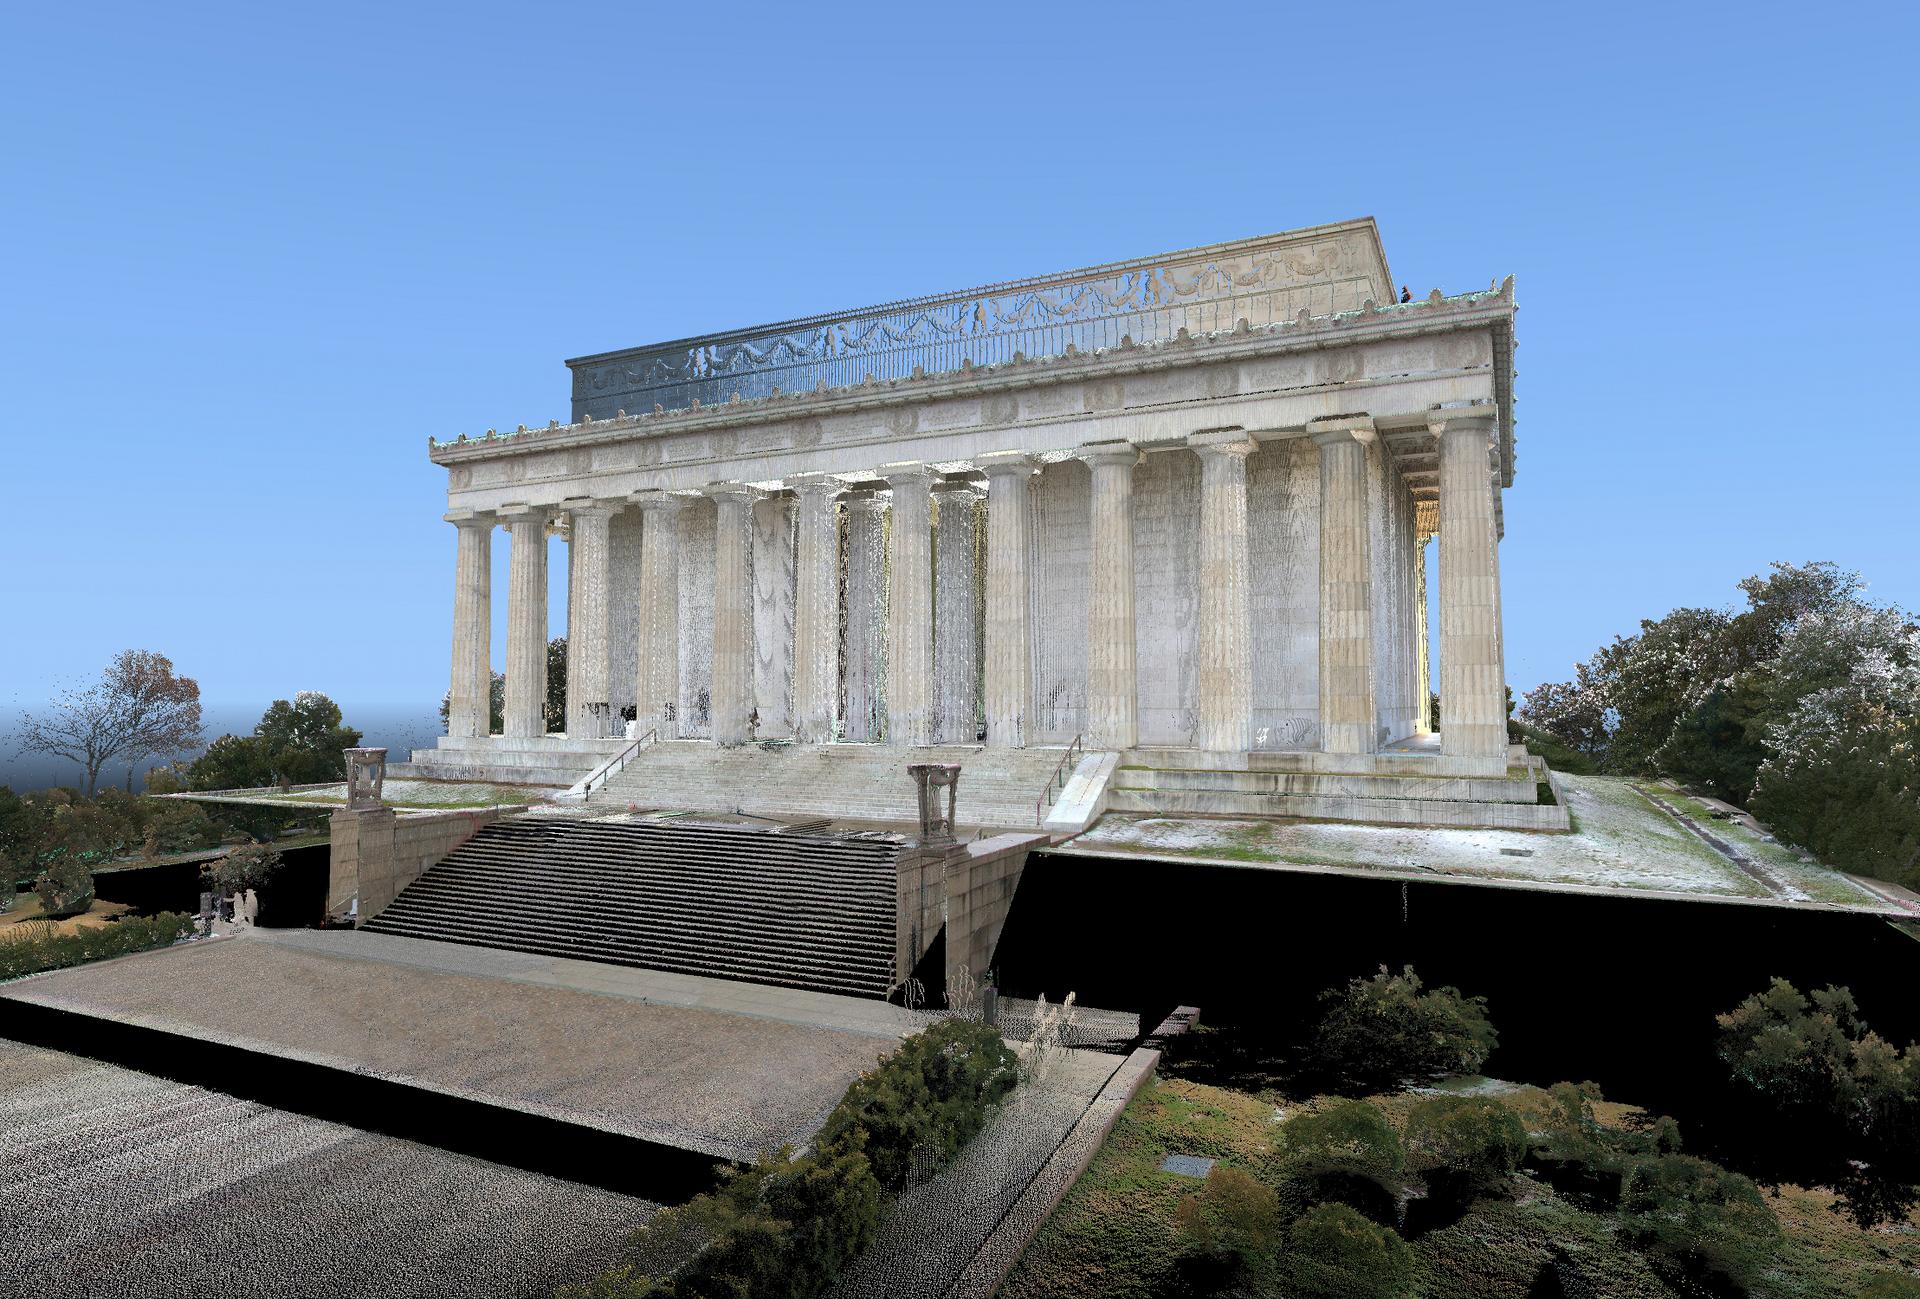 Laser scan data with coloring of the Lincoln Memorial.